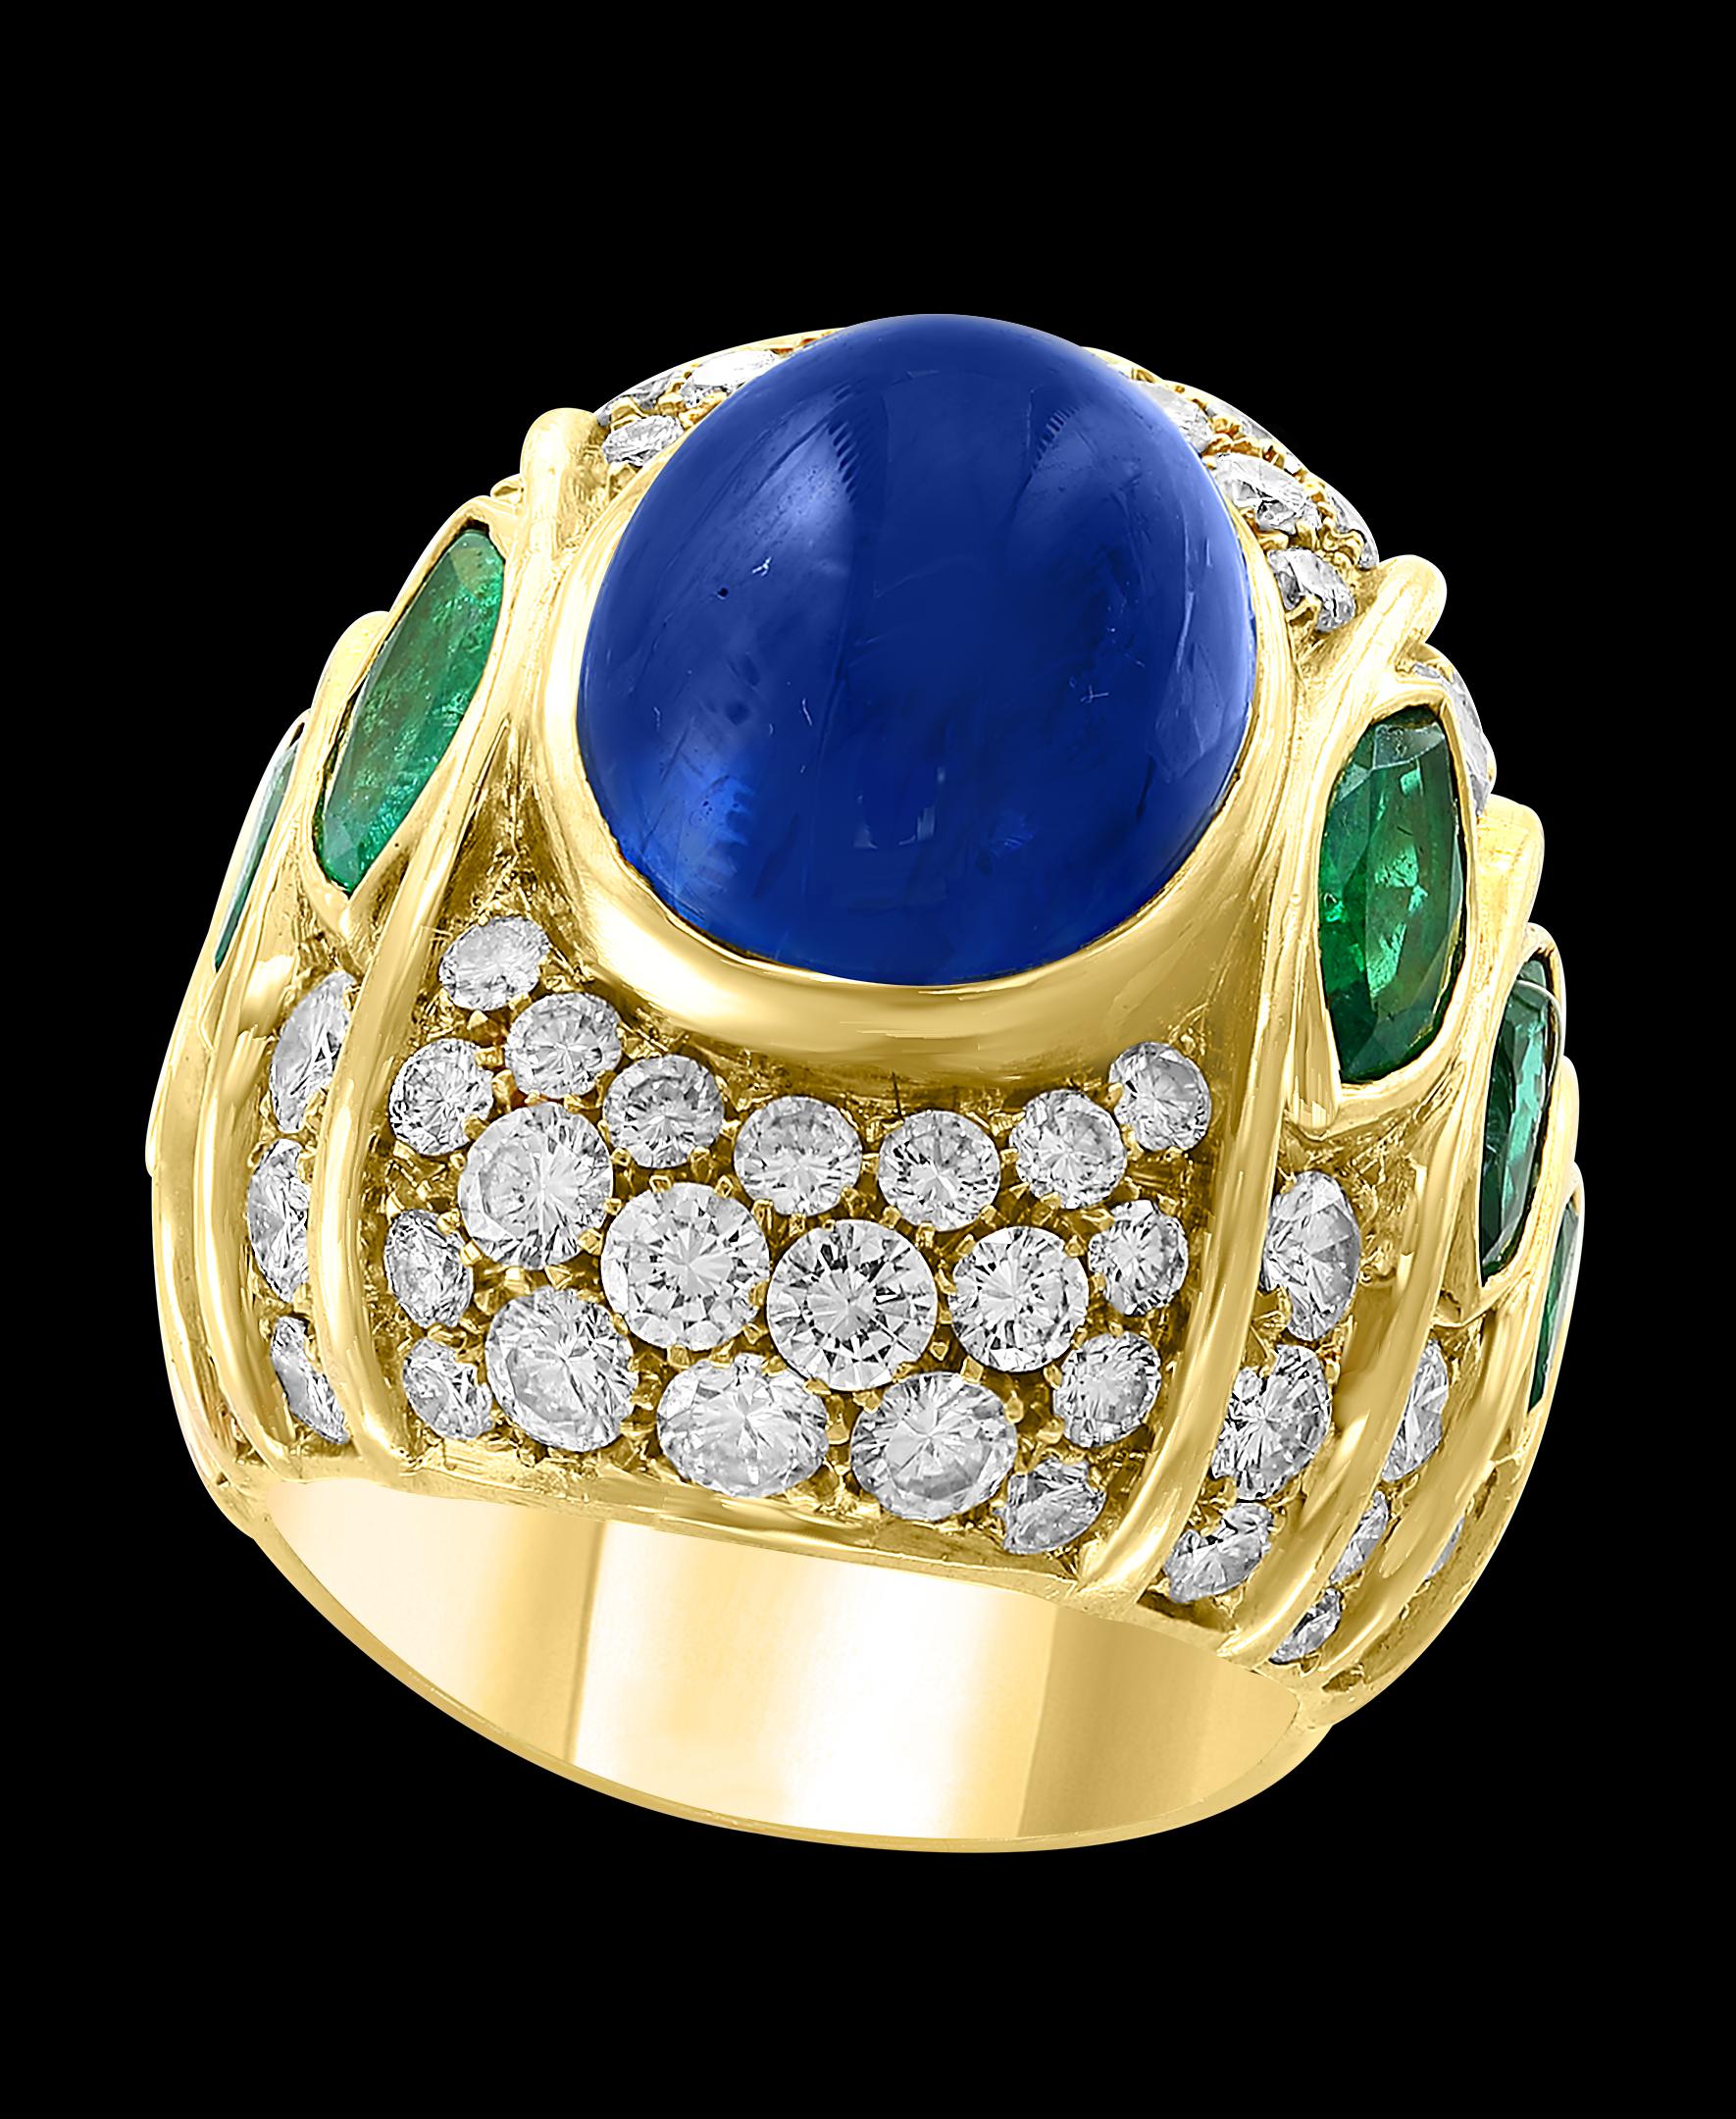 18 Carat Blue Sapphire Cabochon natural 
Diamonds 4.5 ct of  brilliant  Round cut diamonds.
3 Marquise shape Emeralds on each side.
18 K yellow gold 26 Grams
Unisex ring 
Ring size 6.5
If you need the ring resized, it can be done for free of charge,